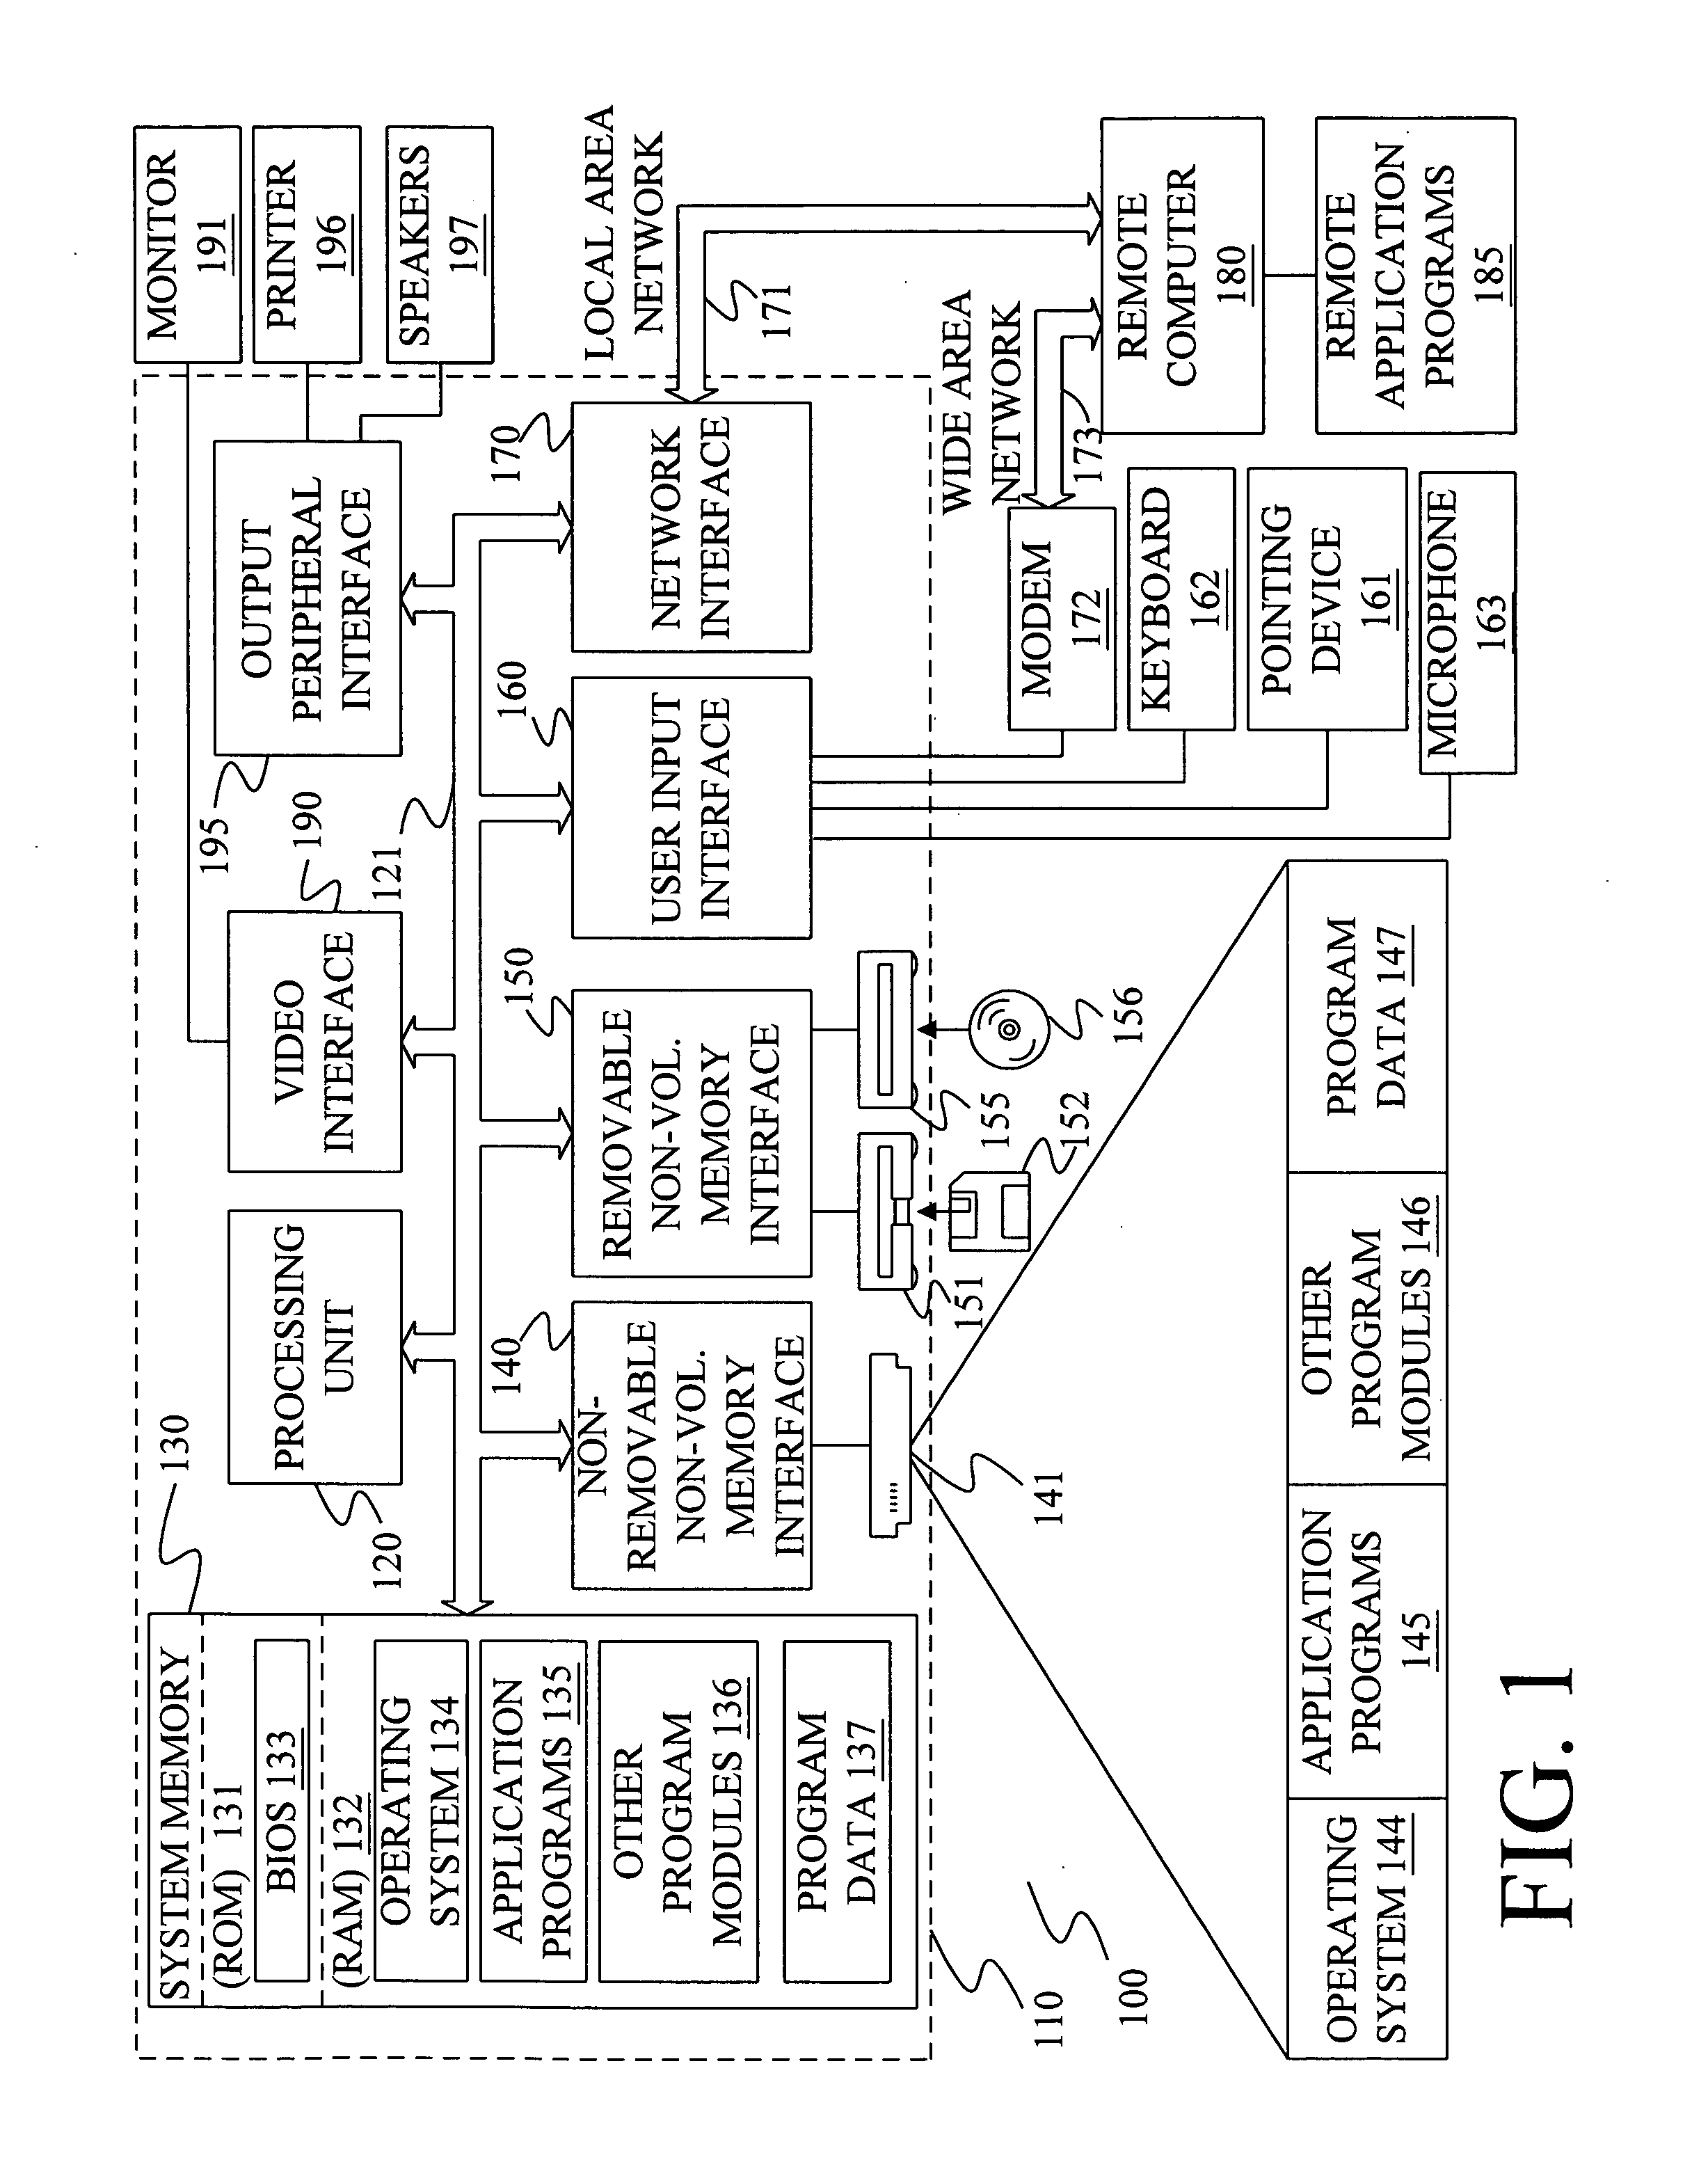 Method and apparatus for generating user interfaces based upon automation with full flexibility